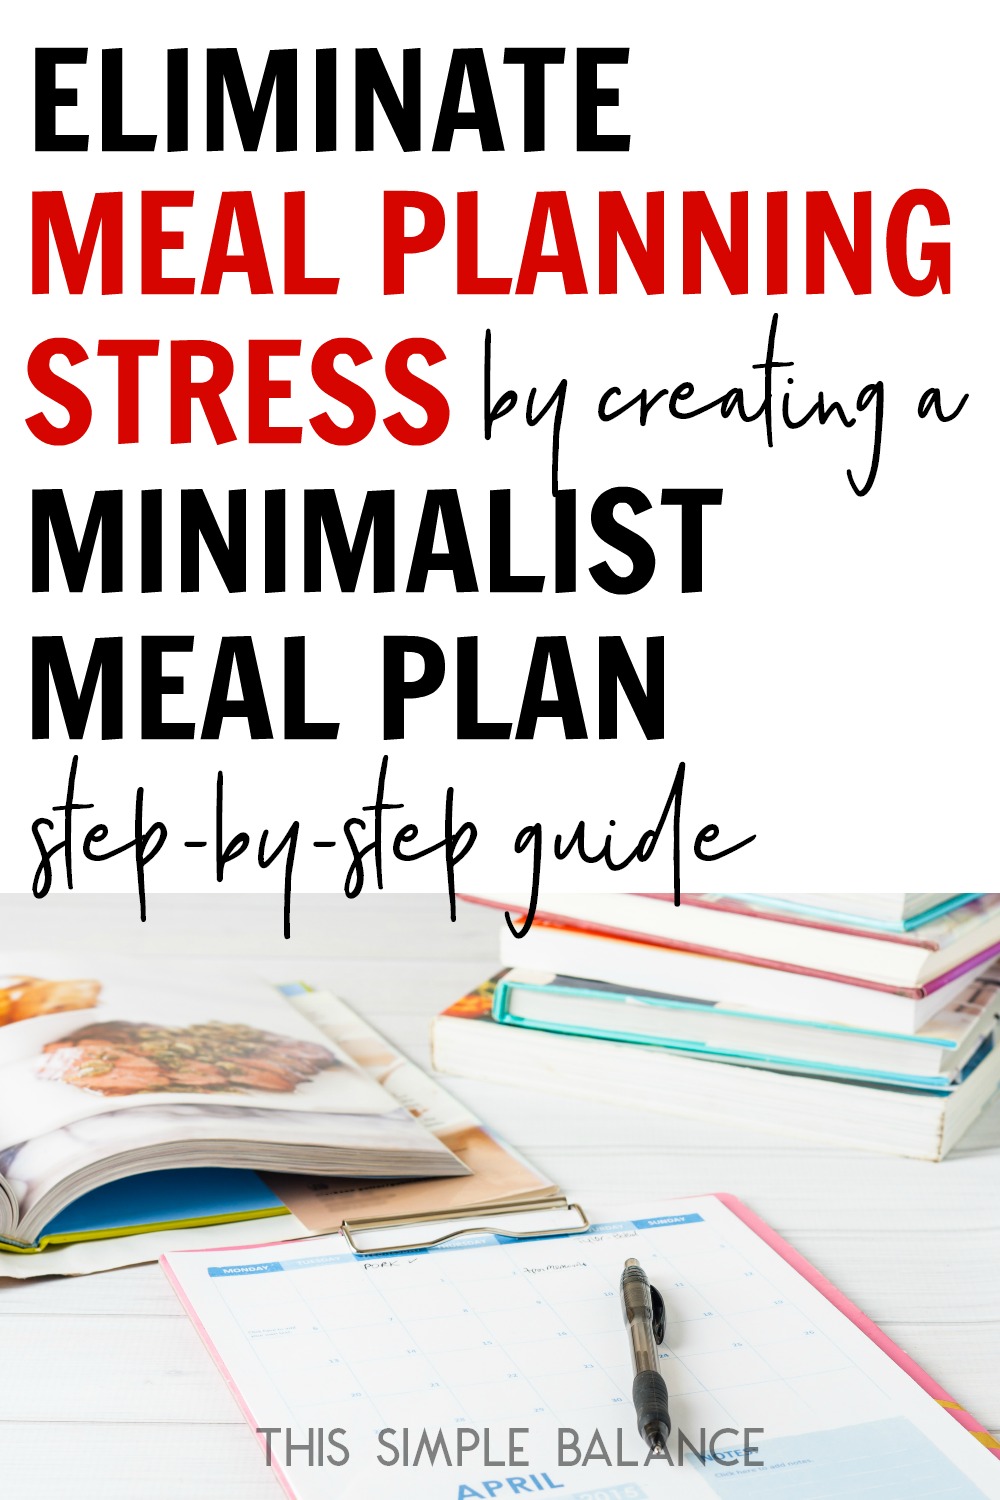 stacks of cookbooks and meal planning printables, with text overlay, "eliminate meal planning stress by creating a minimalist meal plan, step by step guide"